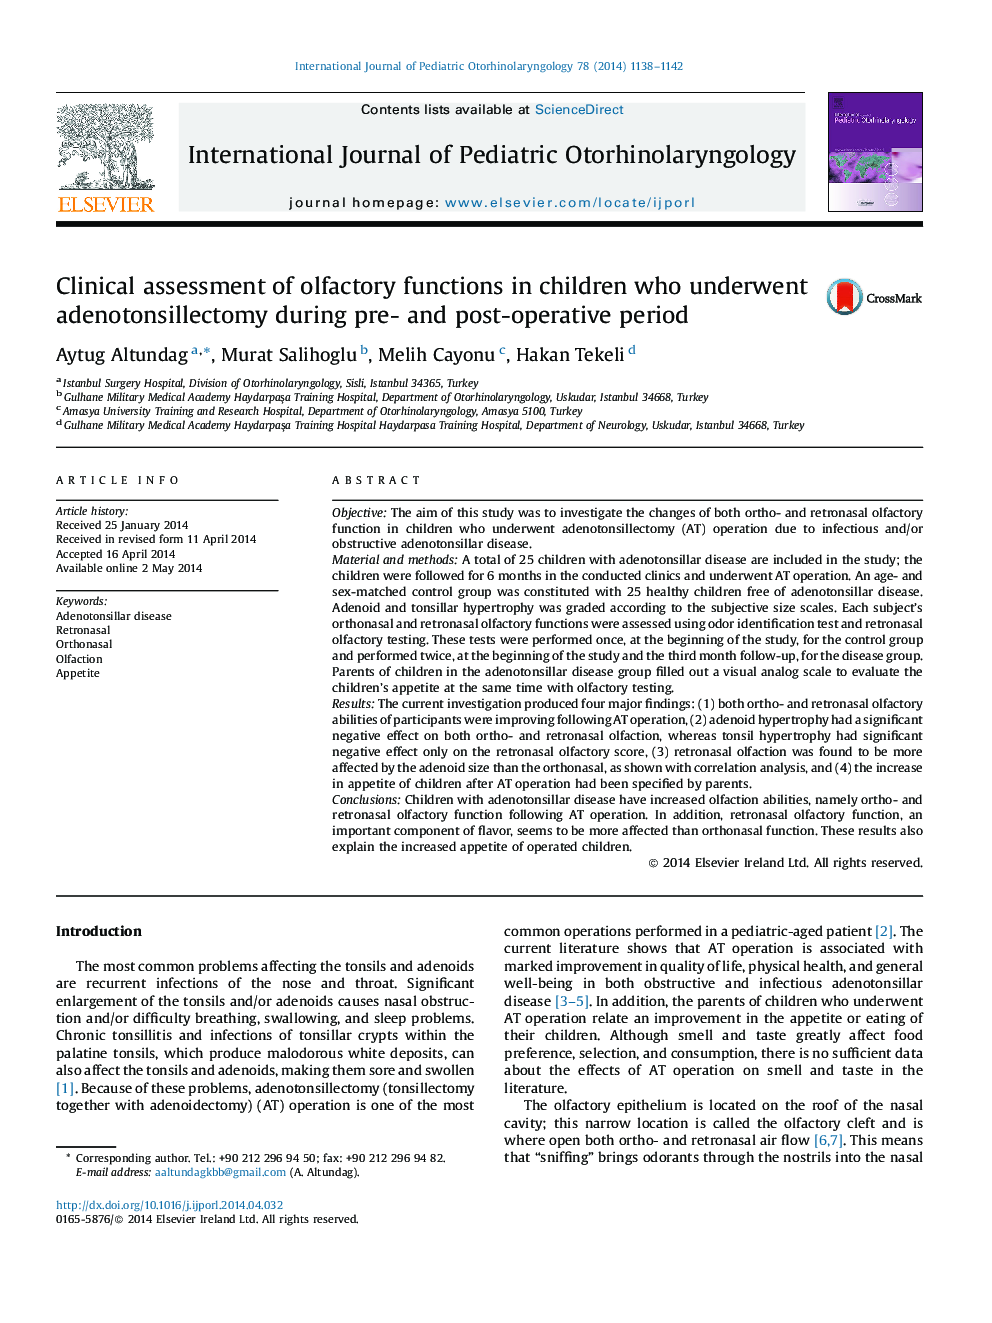 Clinical assessment of olfactory functions in children who underwent adenotonsillectomy during pre- and post-operative period